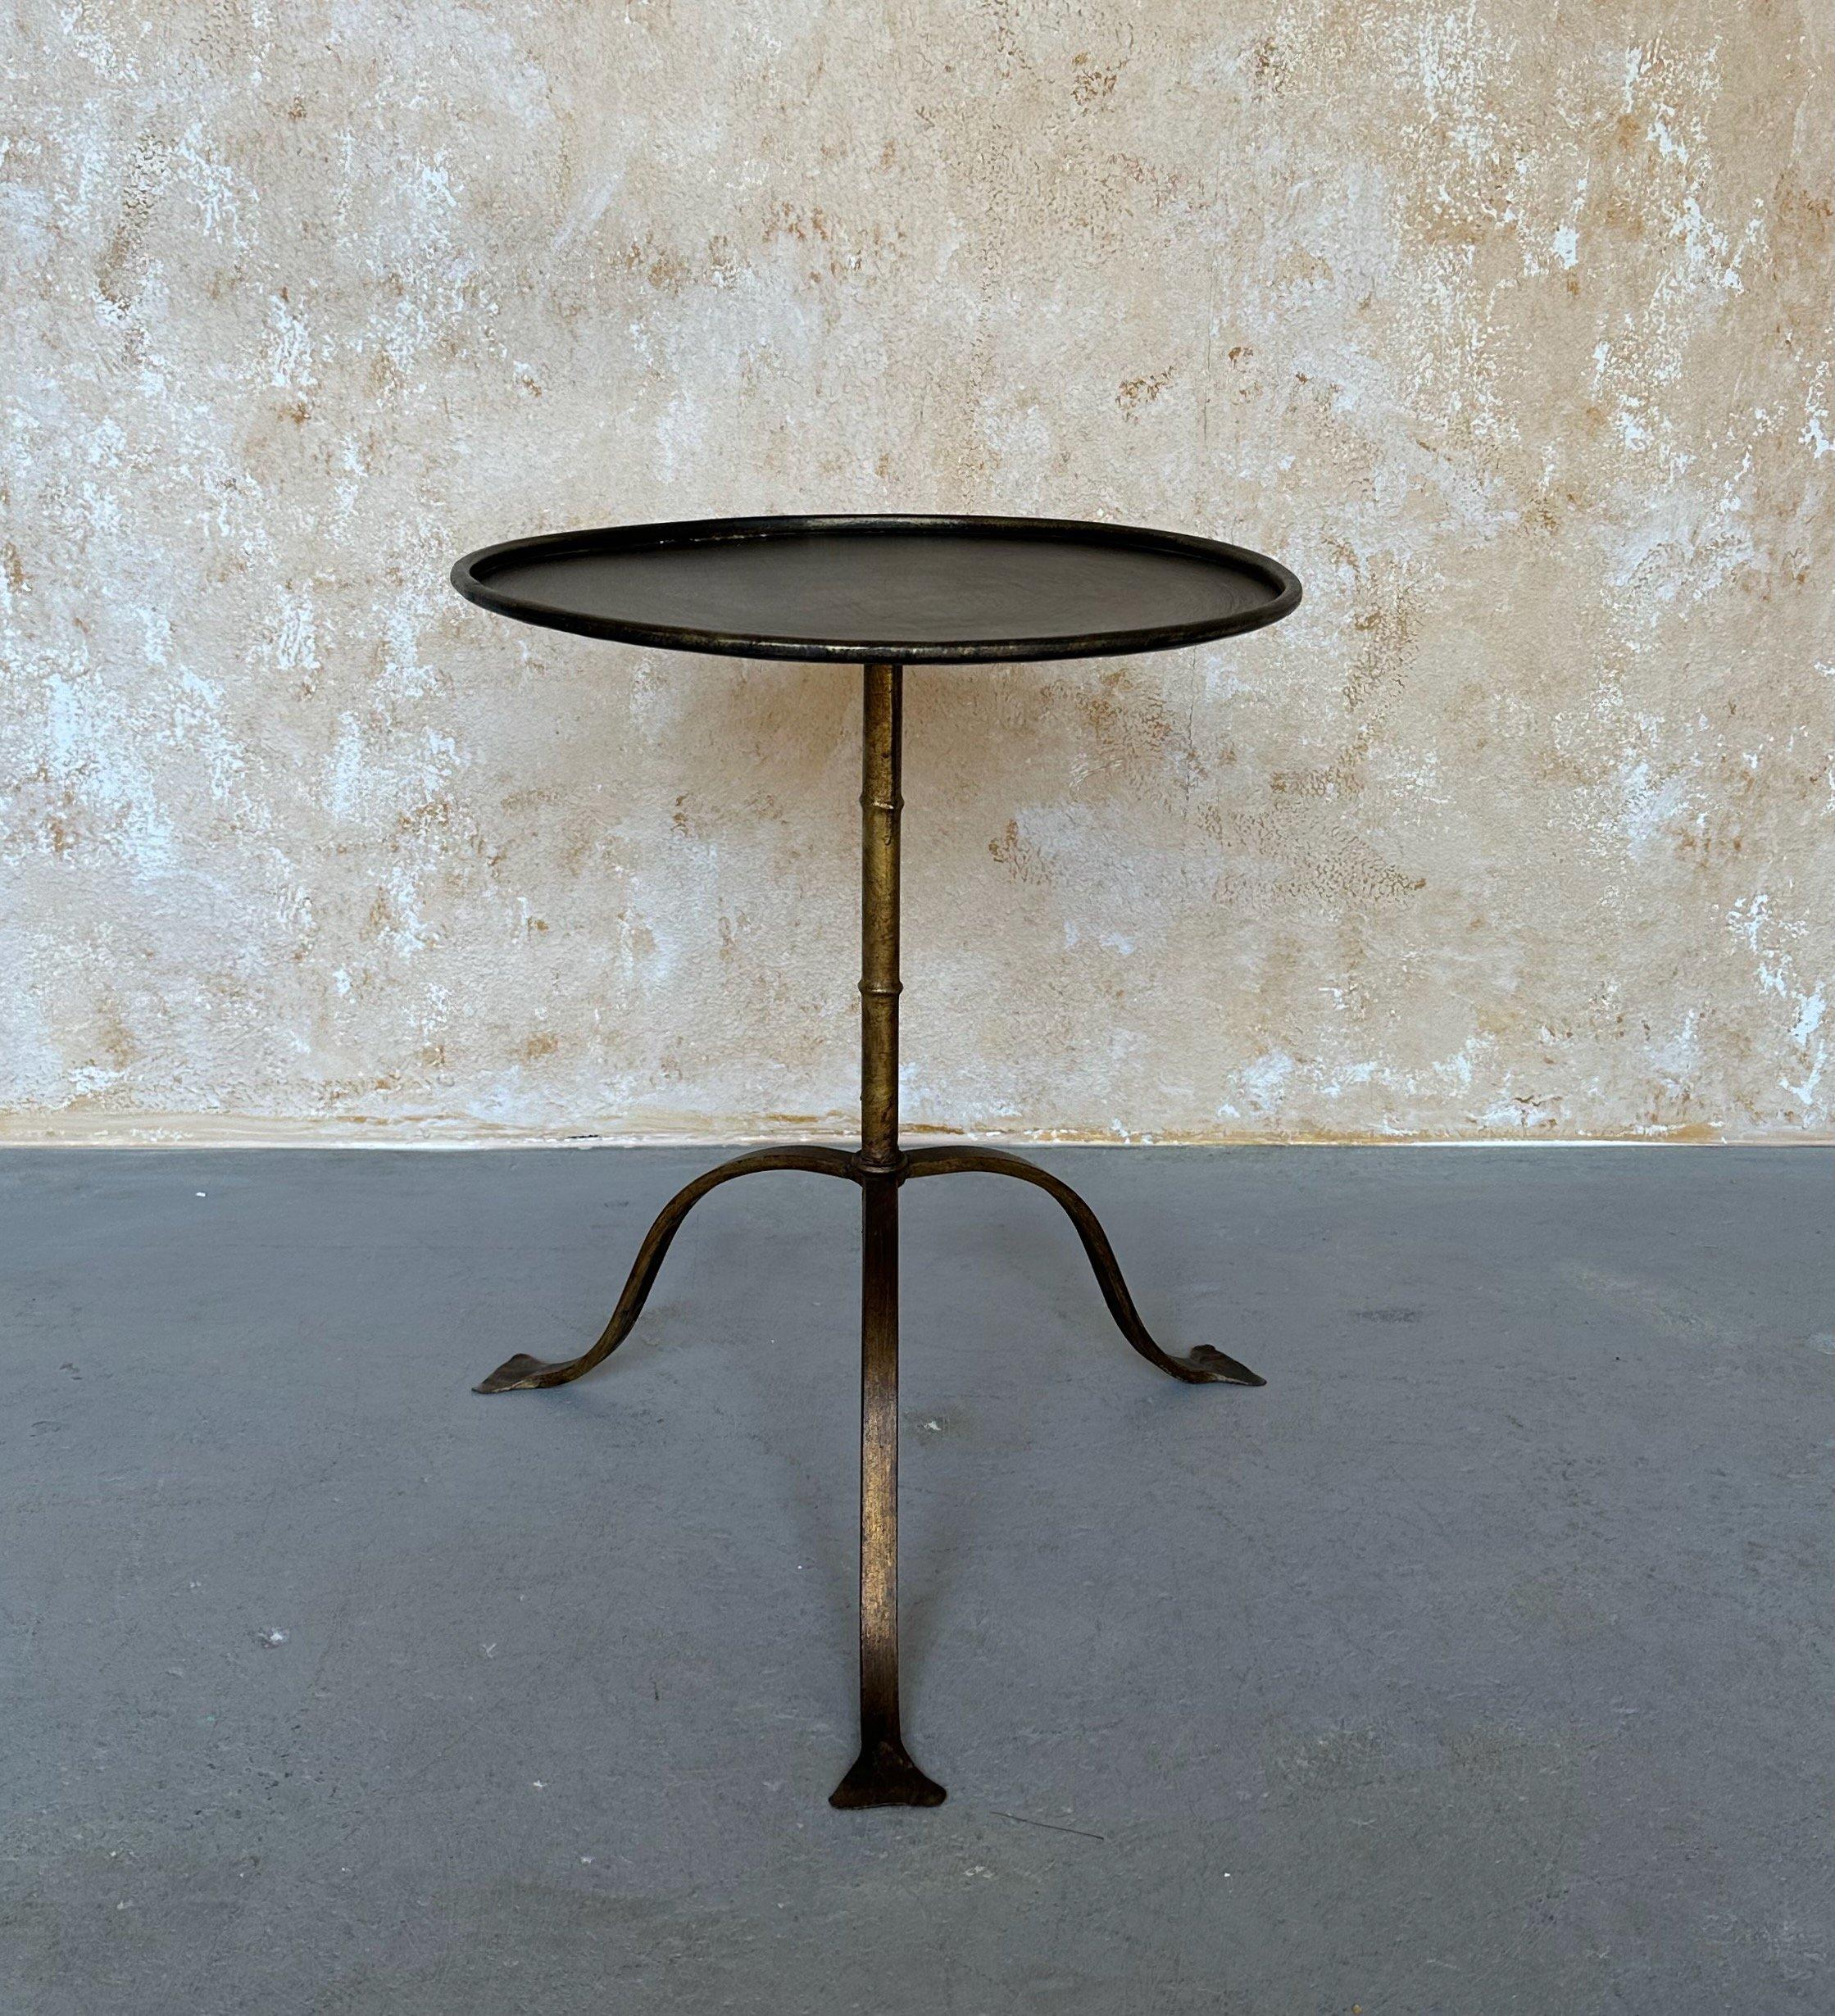 This large iron side or drinks table was recently crafted by European artisans using traditional iron working techniques. It features a hand applied gold finish with dark undertones and is mounted on a sturdy but fanciful flared tripod base. With